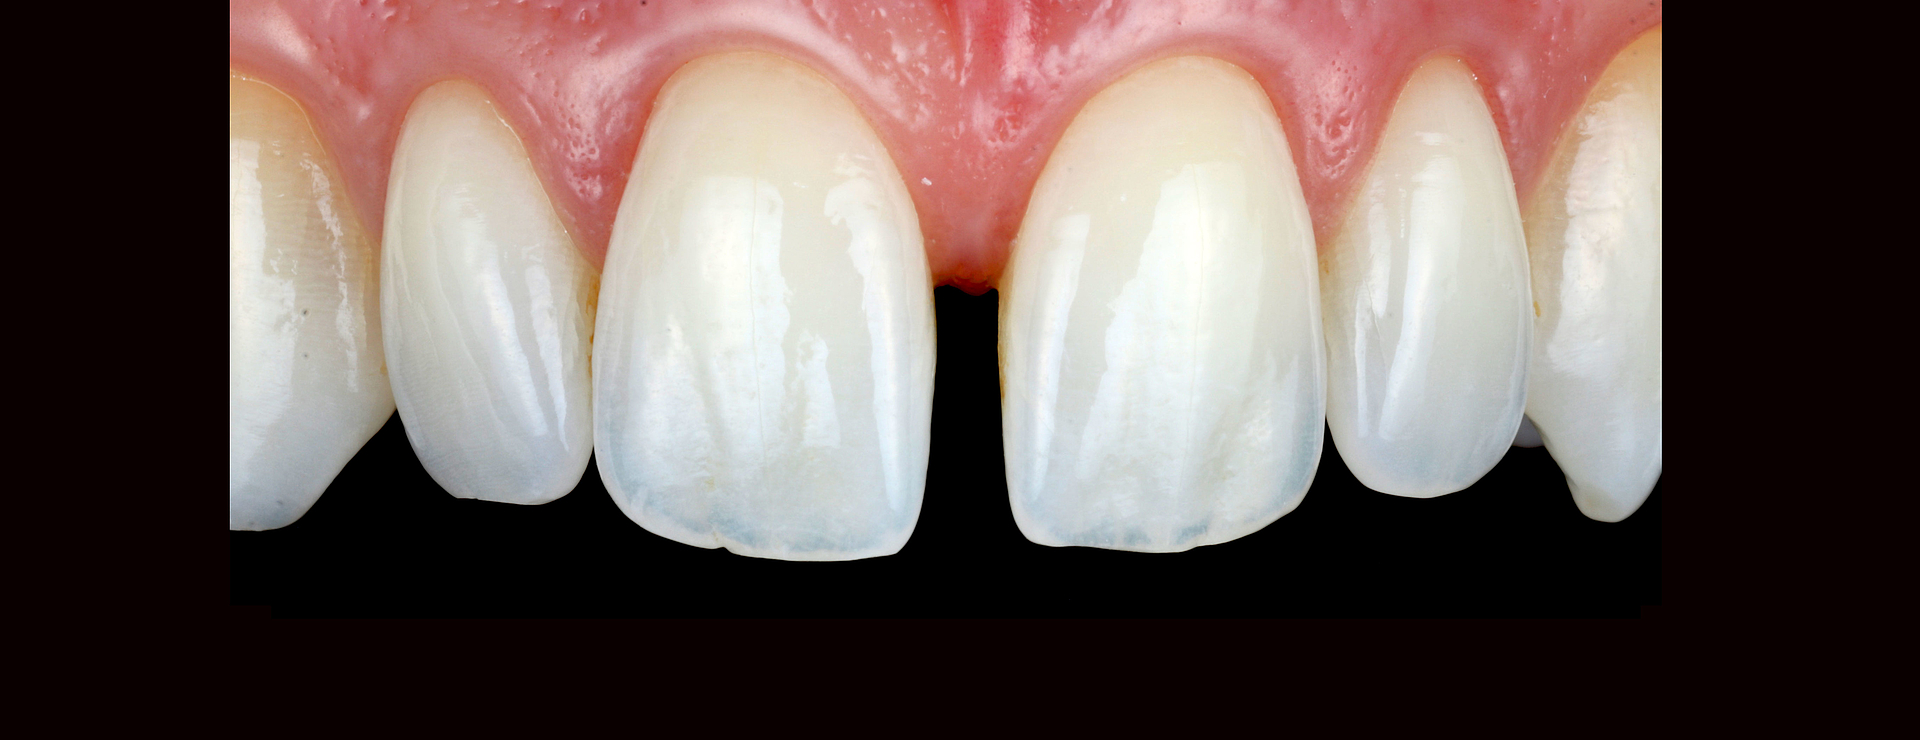 INVISIBLE RESTORATIONS – THIS IS HOW IT'S DONE